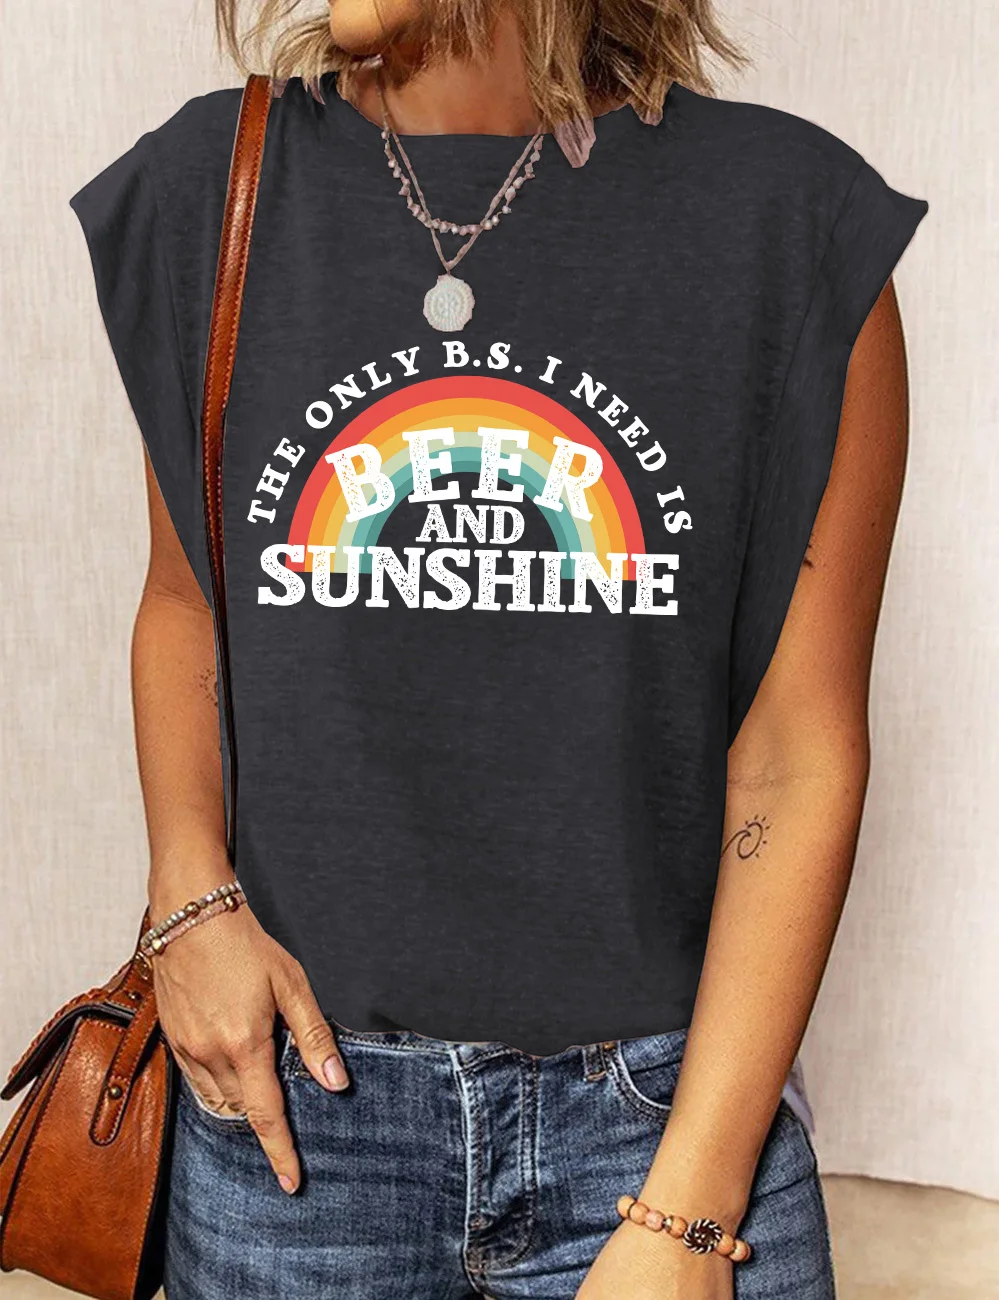 The Only B.S I Need Is Beer And Sunshine Rainbow T-Shirt